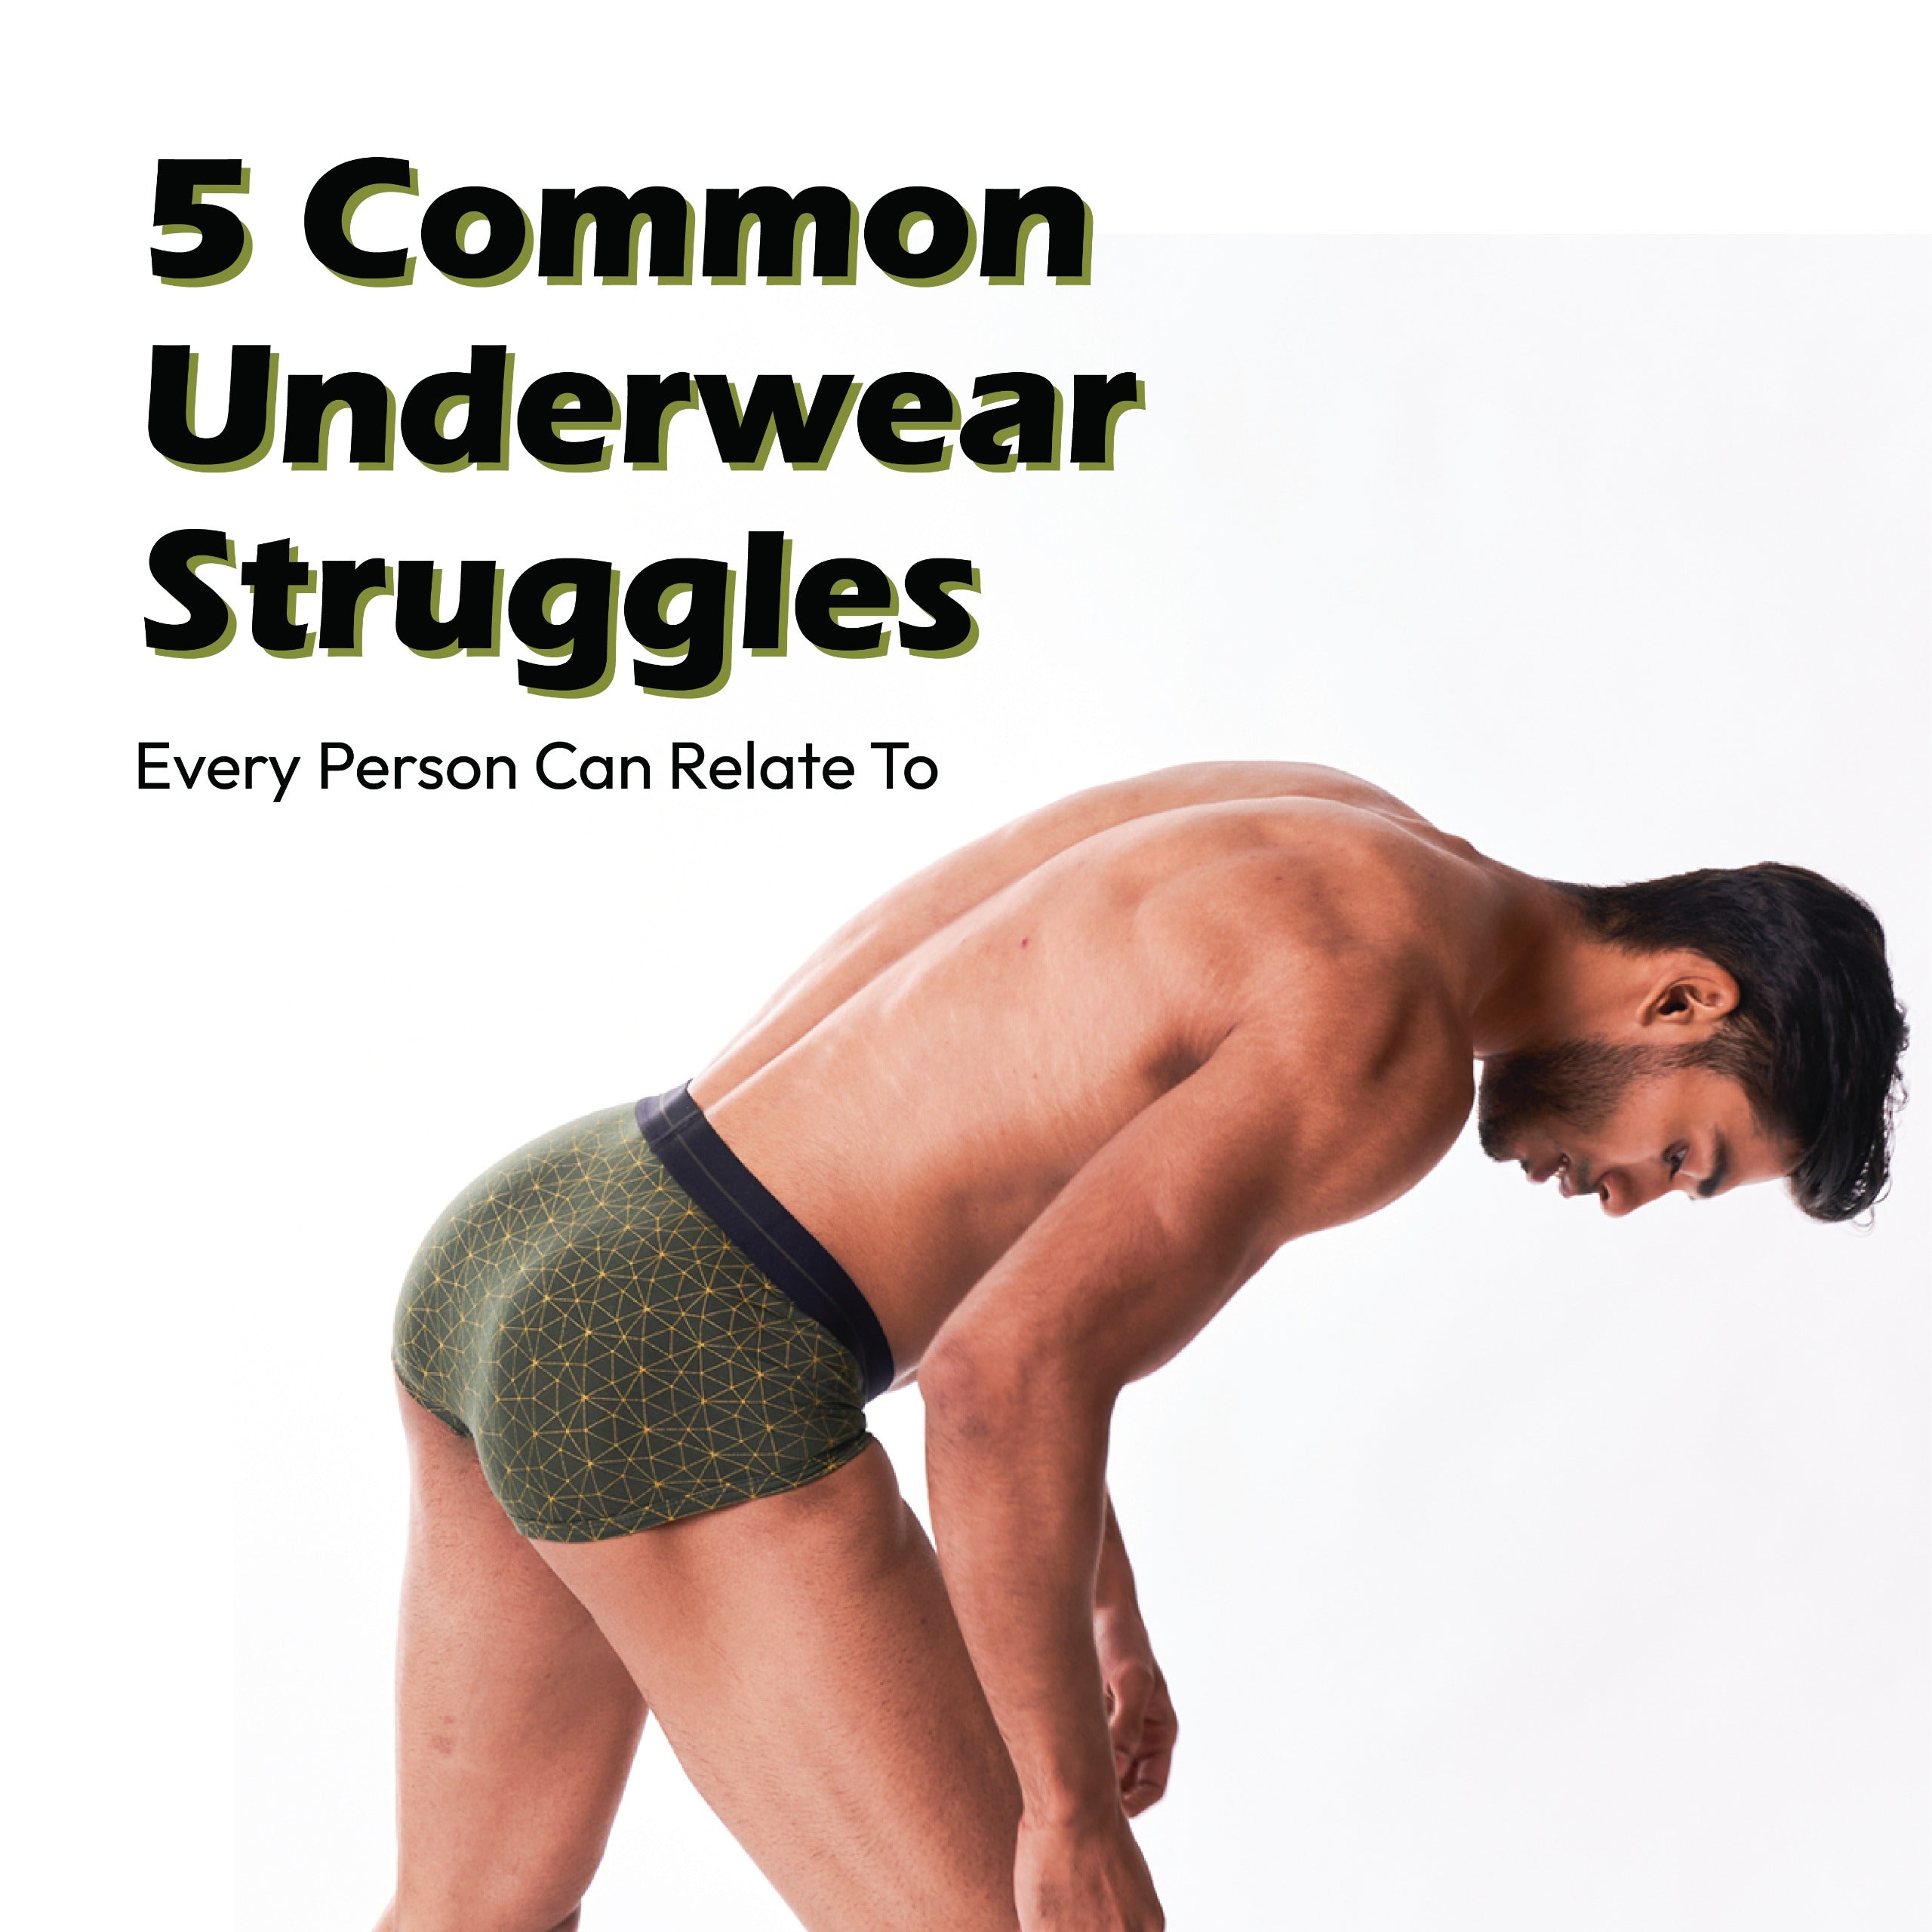 5 Common Underwear Struggles Every Person Can Relate To